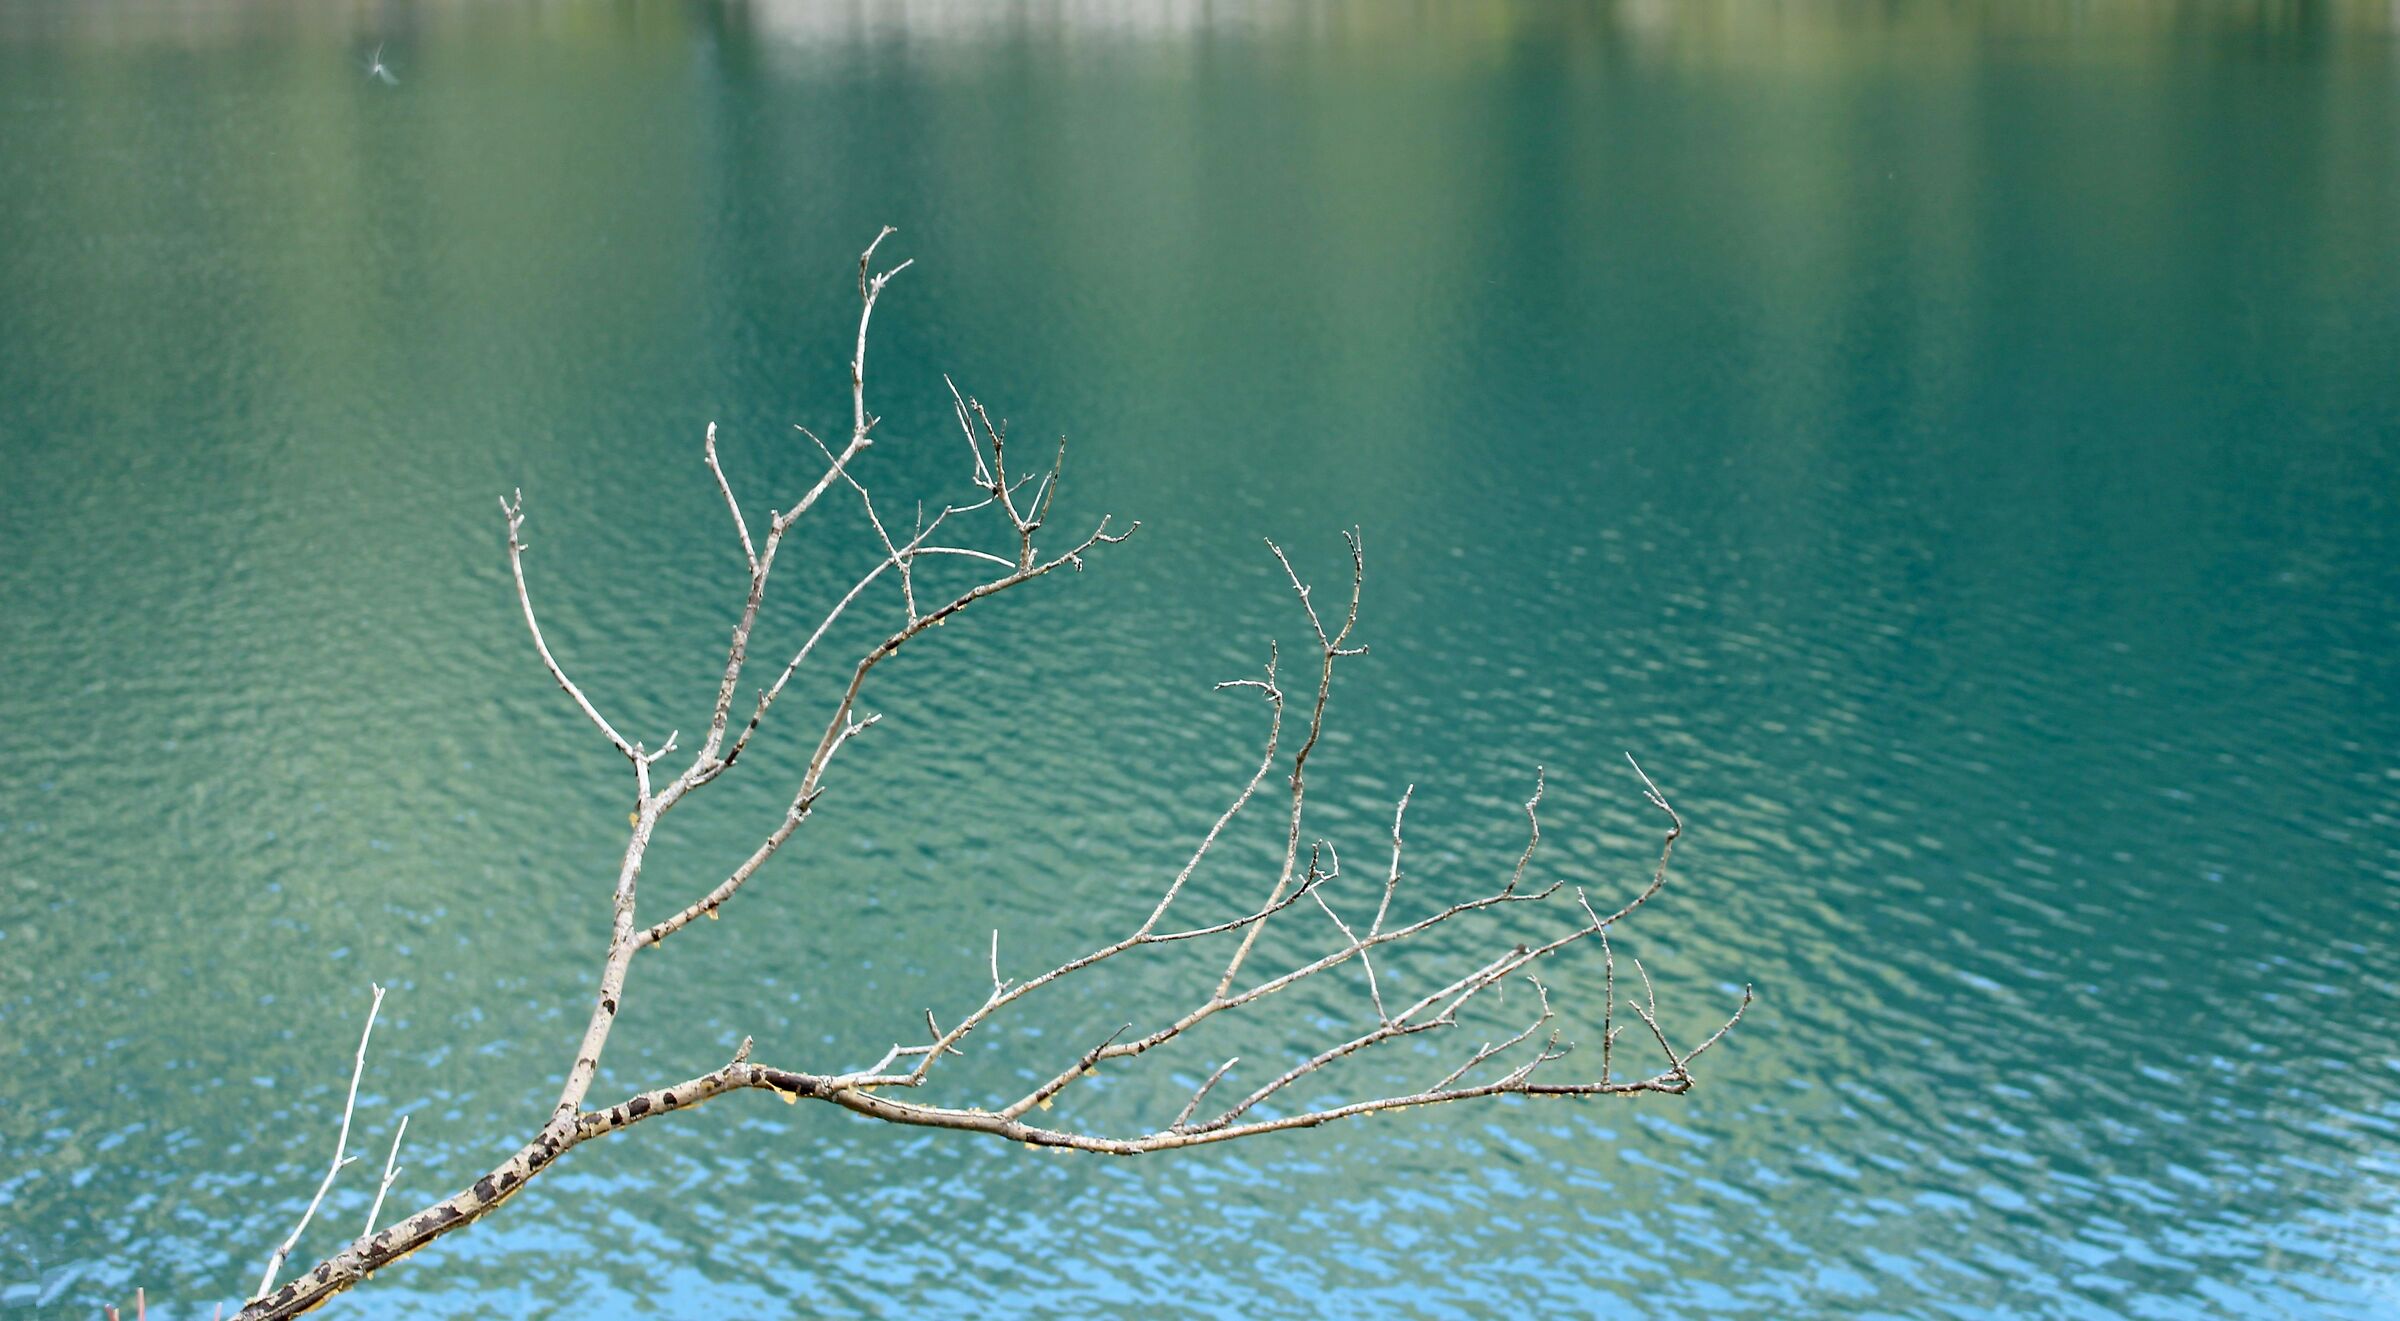 That branch of the lake of......